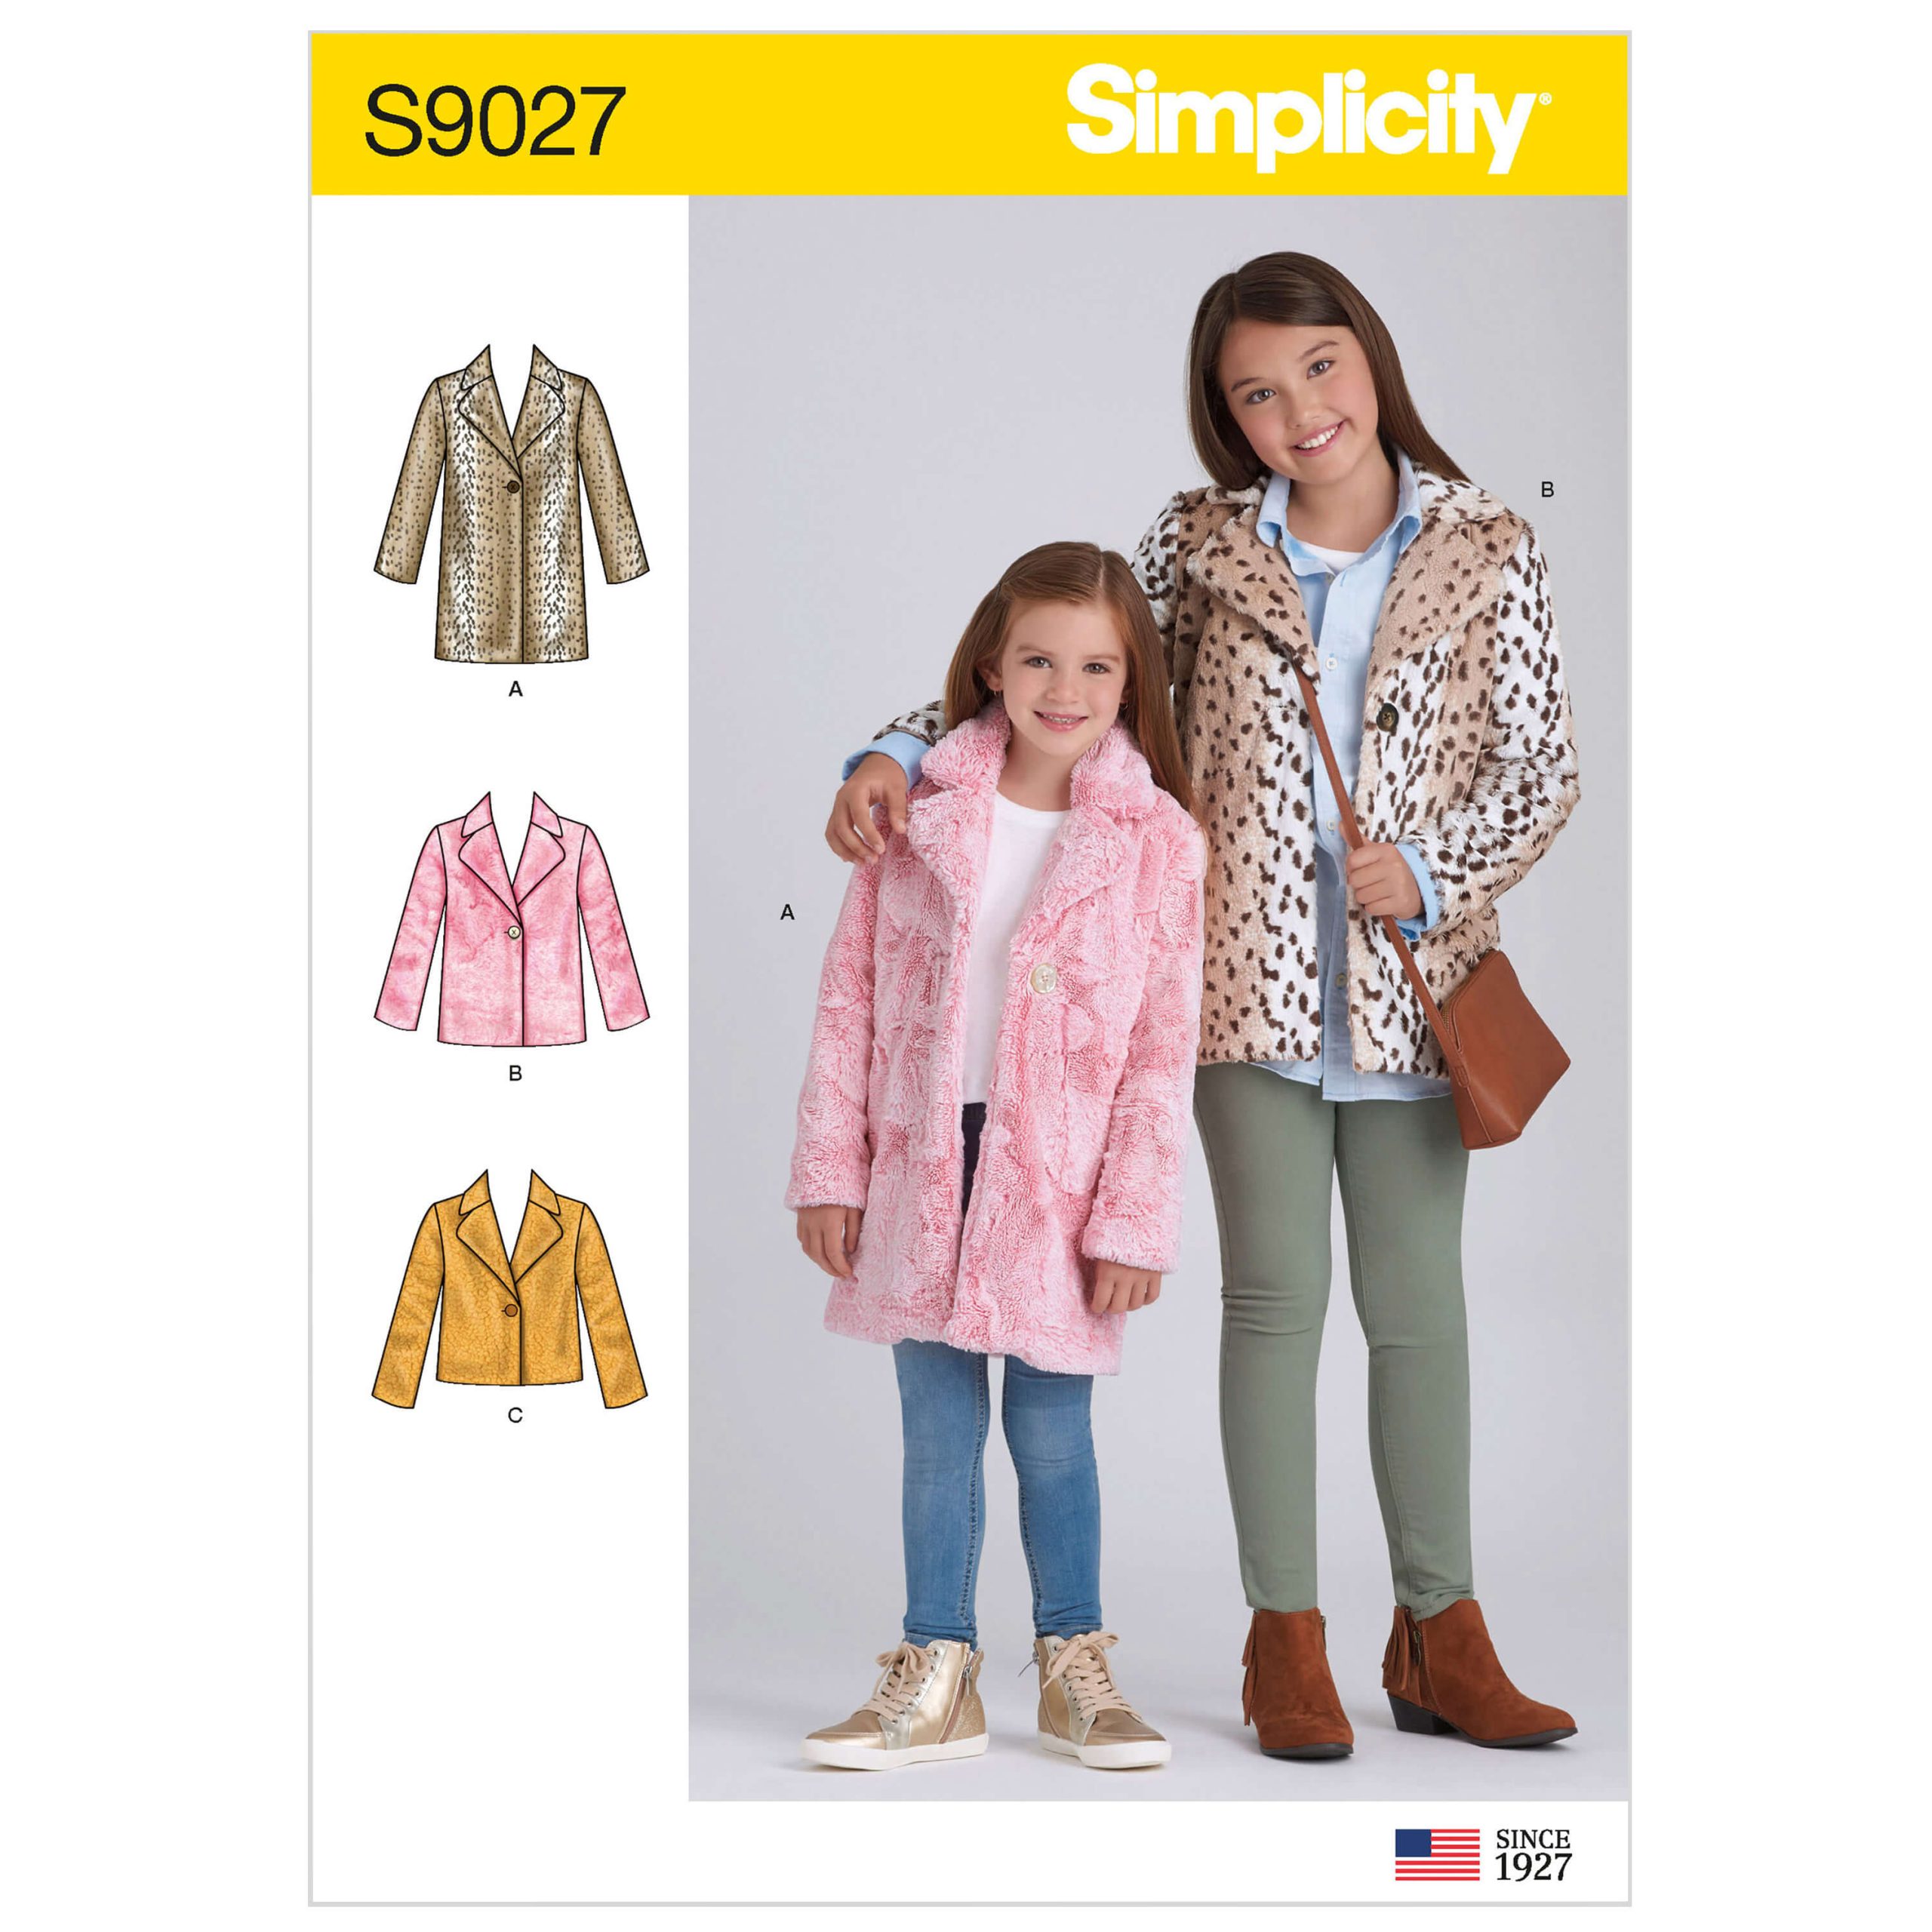 Simplicity Sewing Pattern S9027 Children’s & Girls’ Lined Coat - Sewdirect